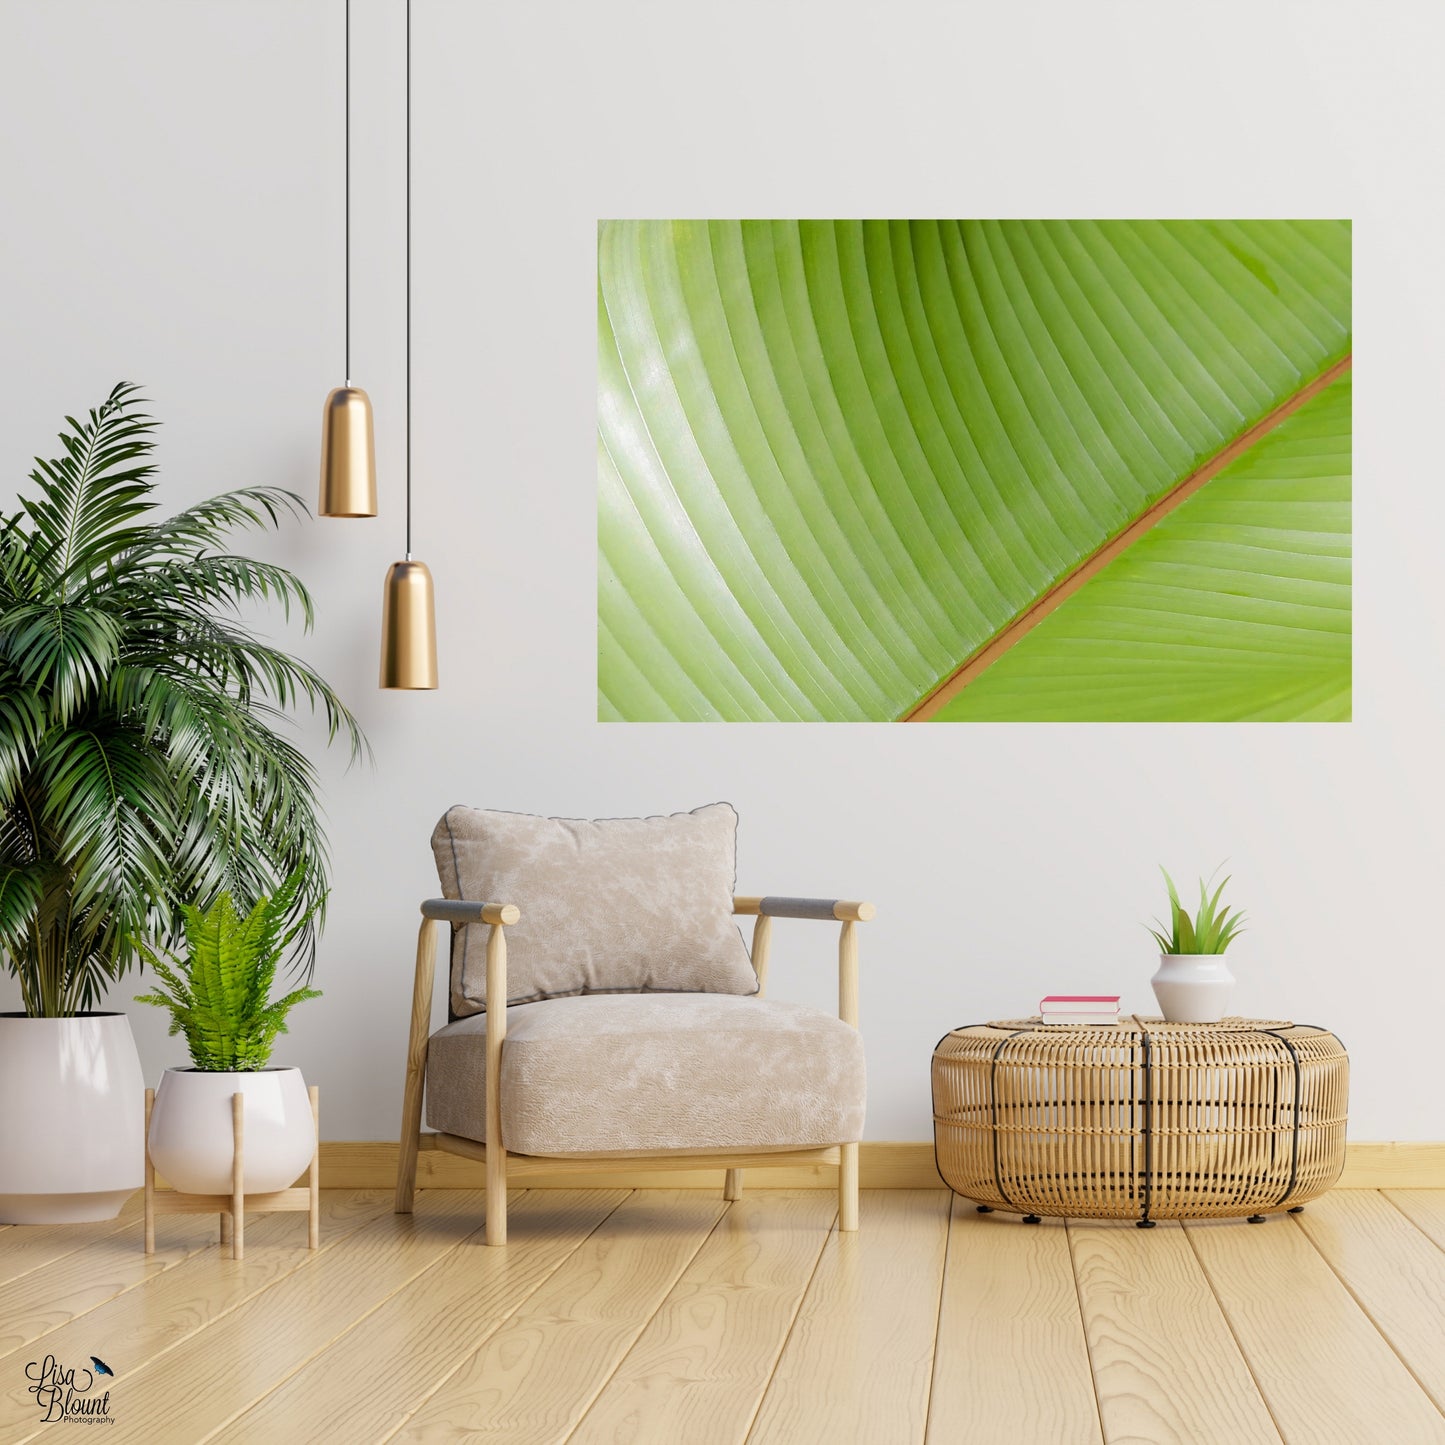 Room setting with greige colors and bright tropical abstract green leaf fine art hanging on wall